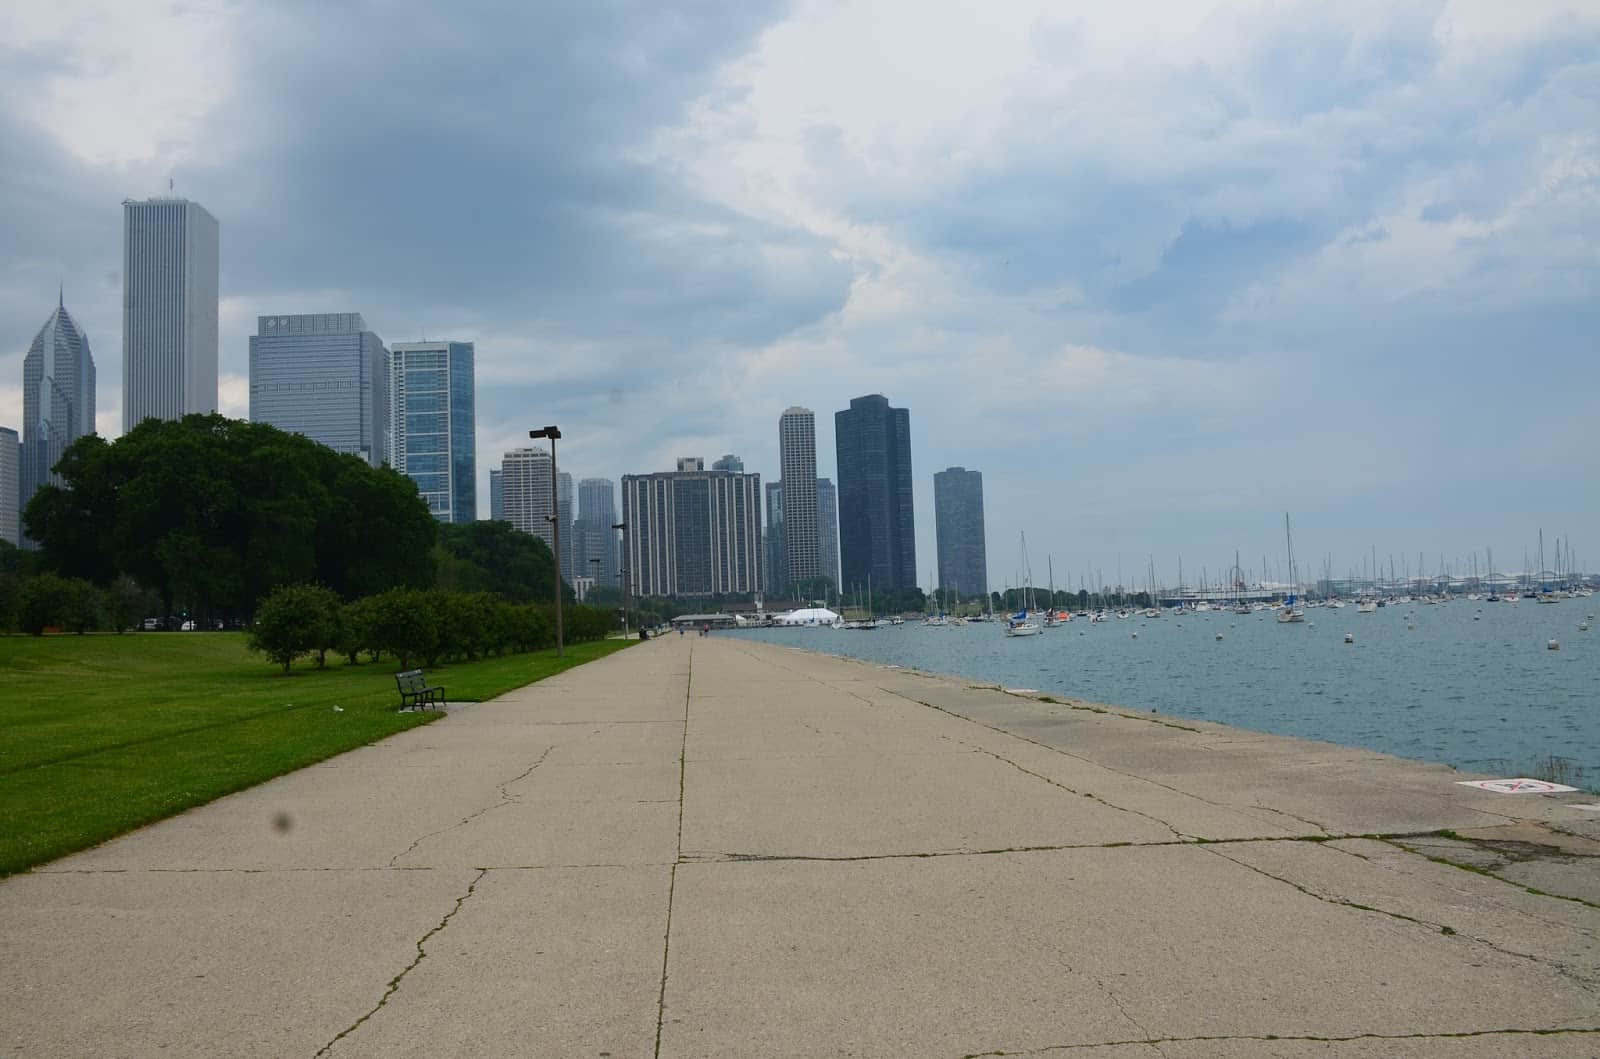 Lakefront Trail in Chicago